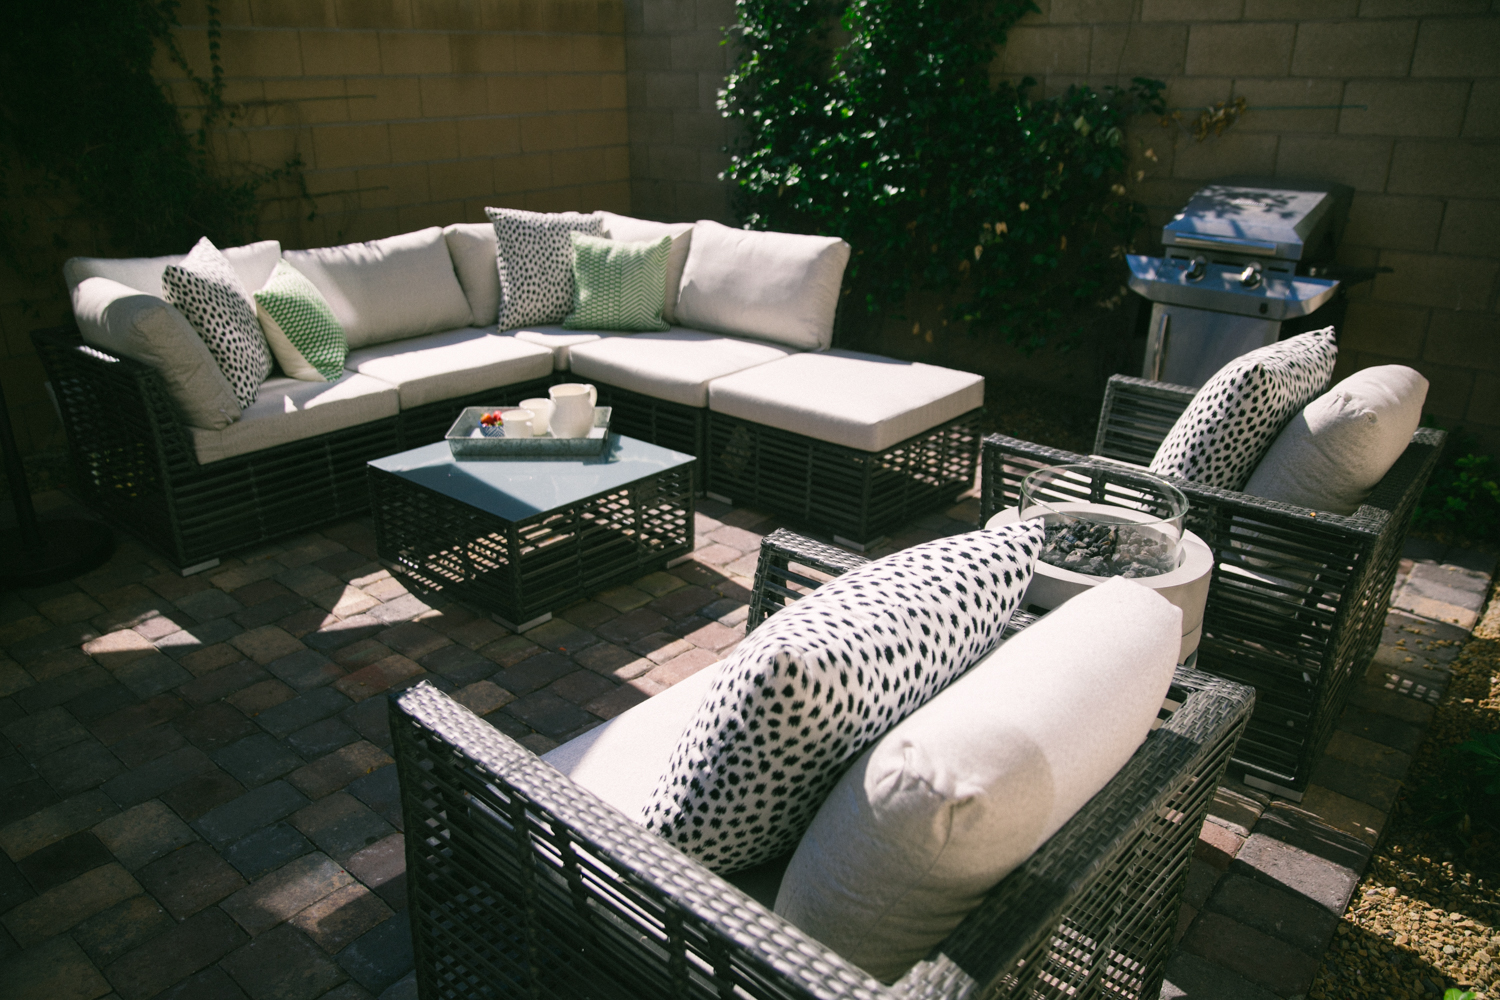 Outdoor Space ideas featured by popular Las Vegas life and style blogger, Life of a Sister